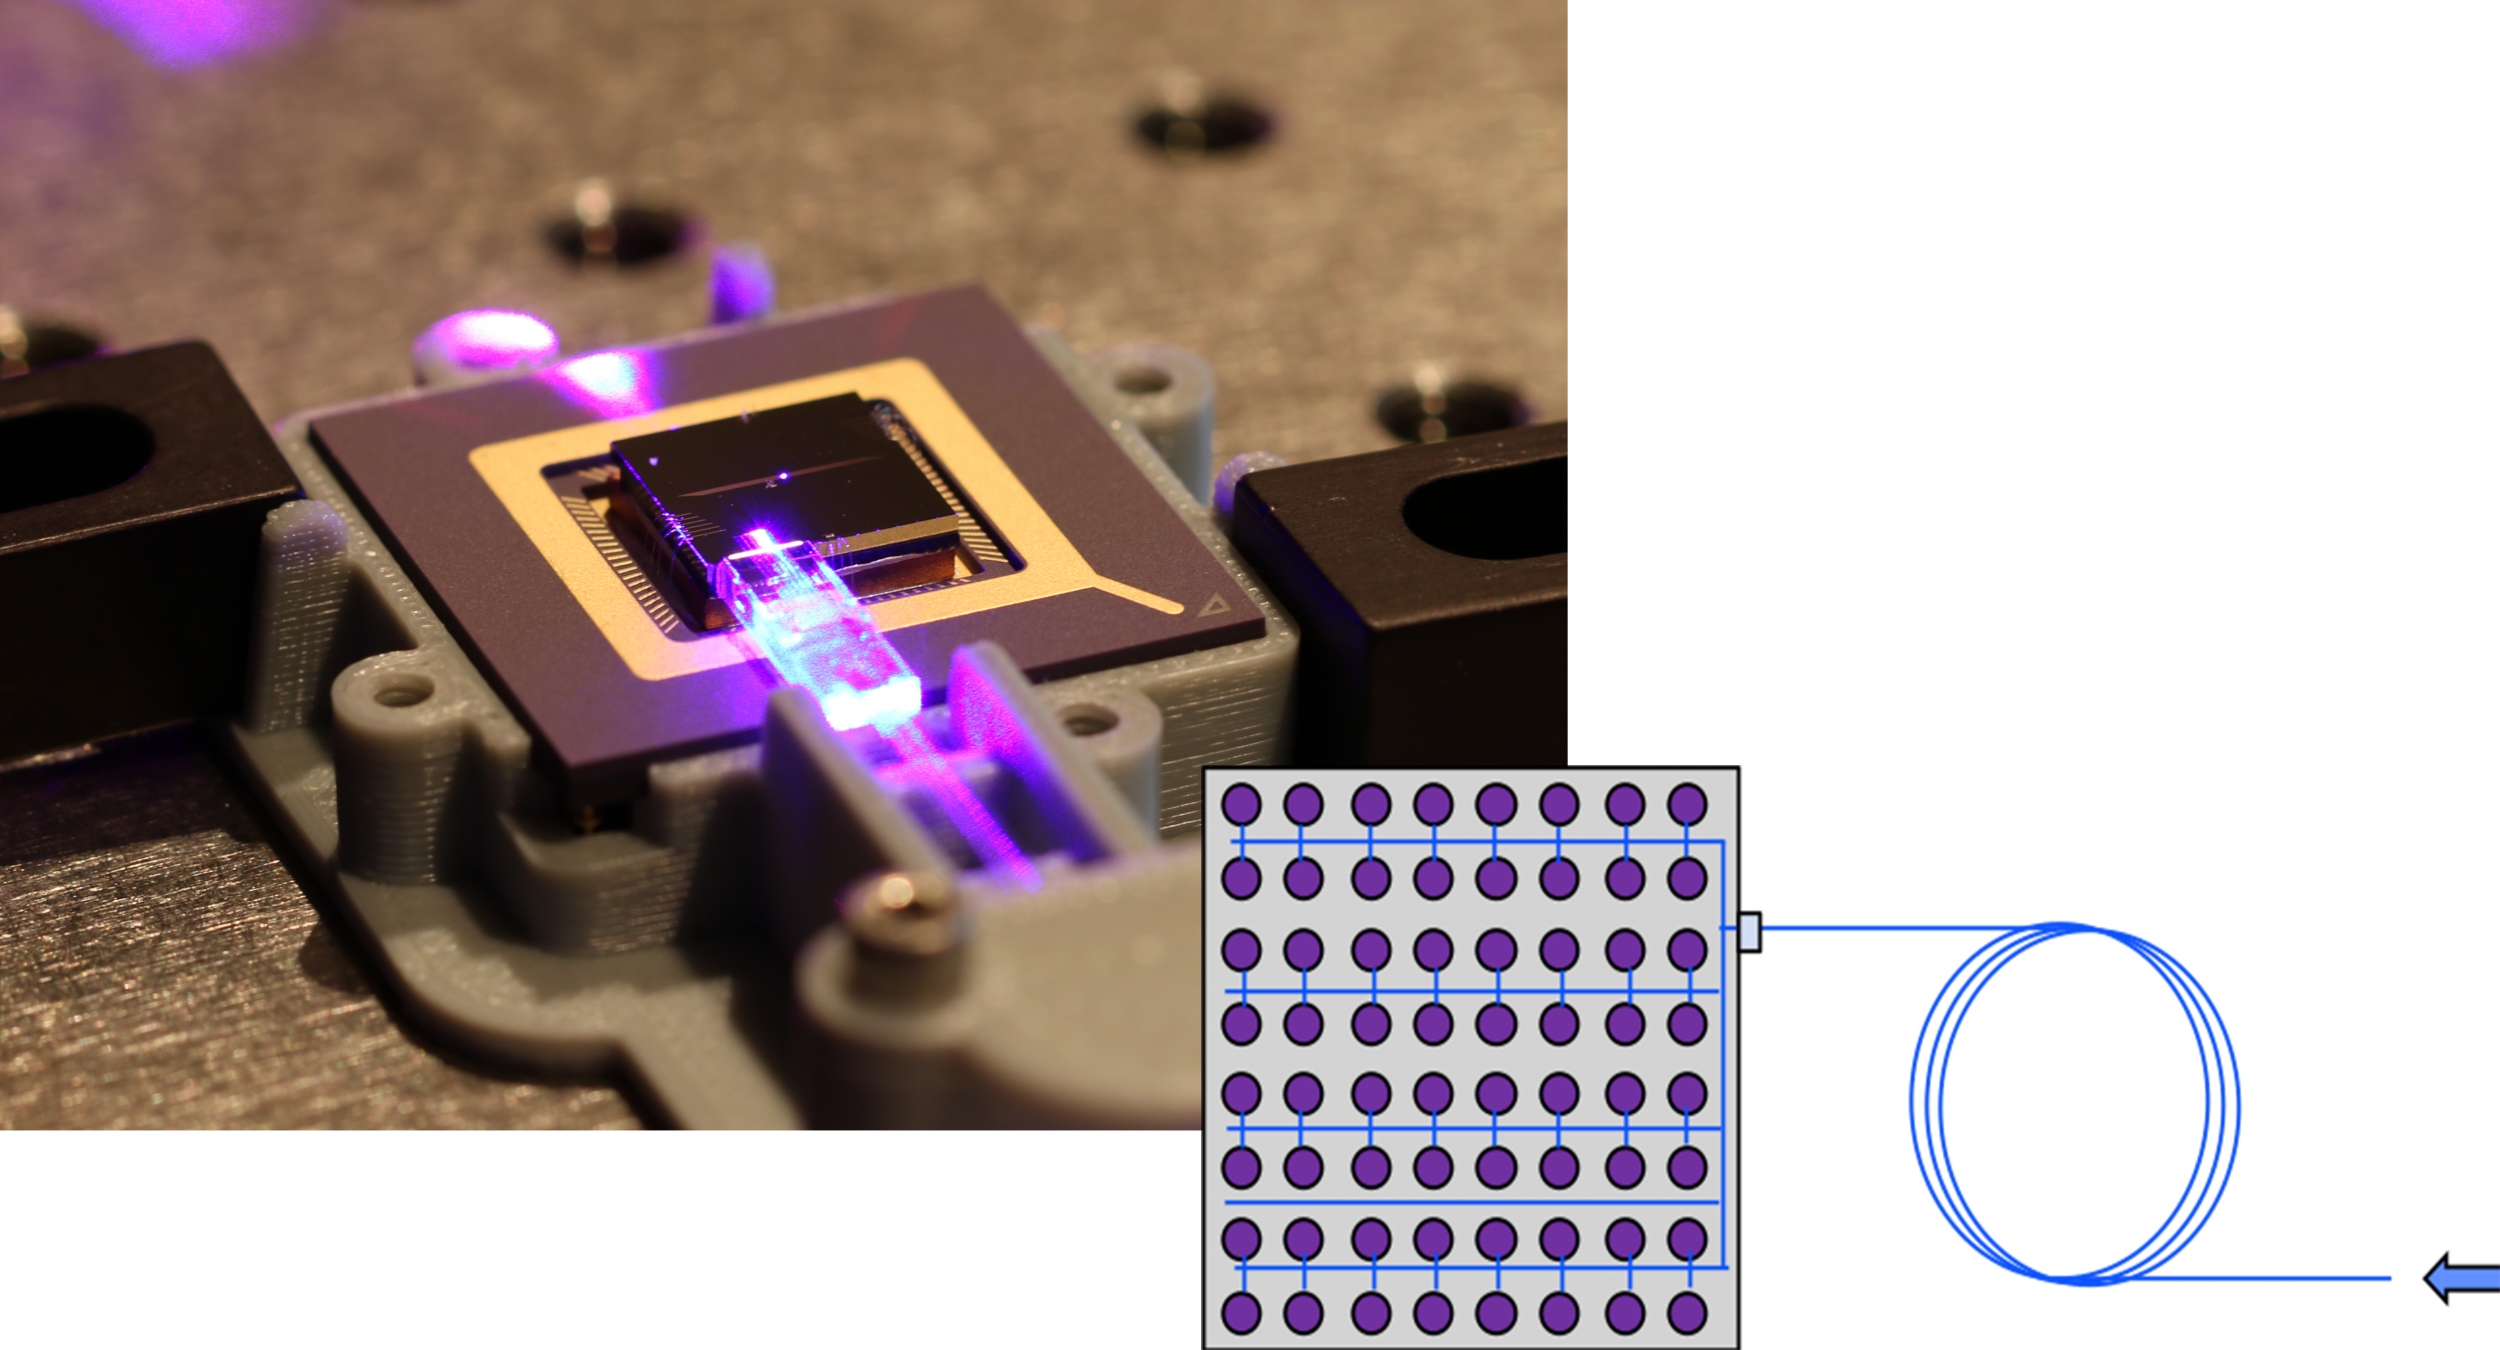 While the chip developed at the Laboratory, left, is a proof of concept and is designed to address a small number of ions, the research team's goal is to use this technology to control many ions arranged in a two-dimensional array pattern, right.